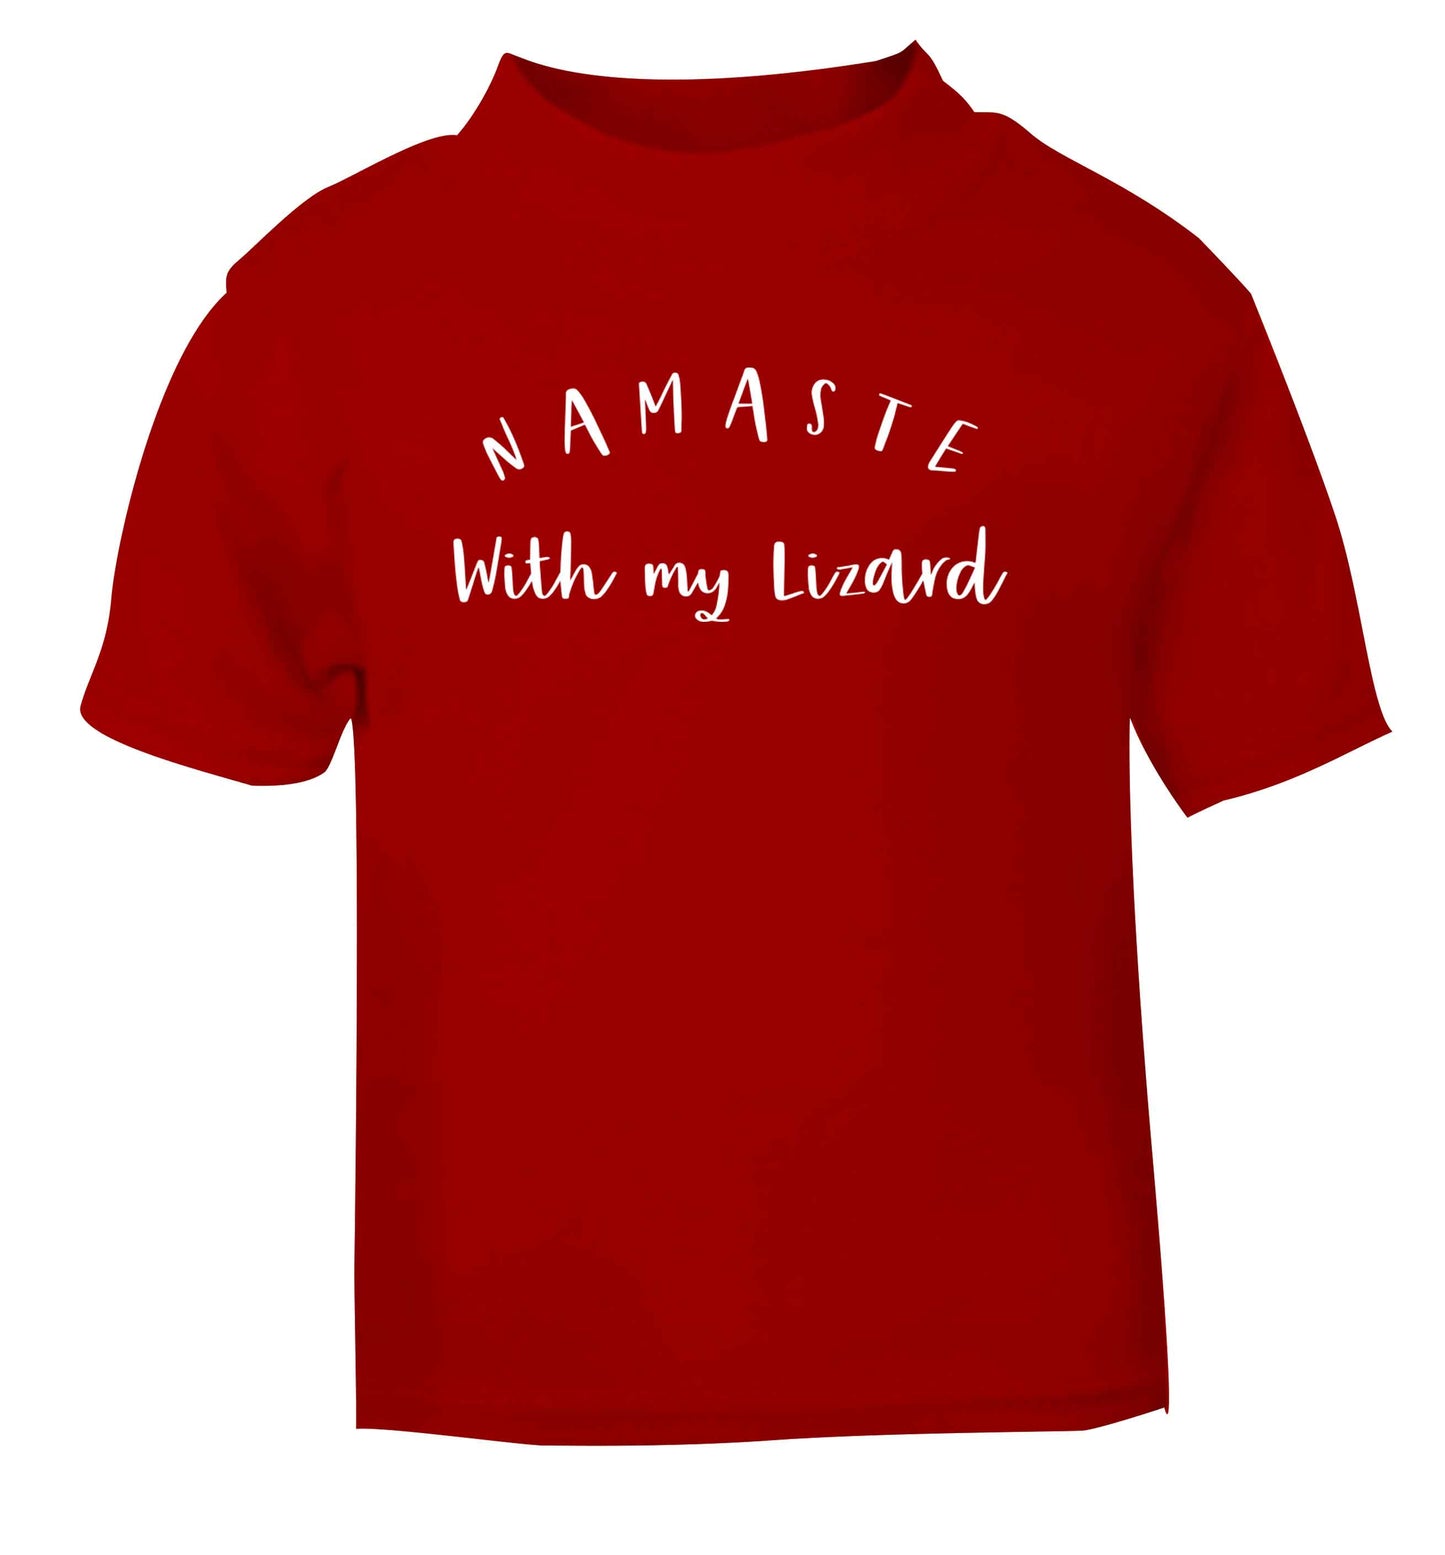 Namaste with my lizard red Baby Toddler Tshirt 2 Years